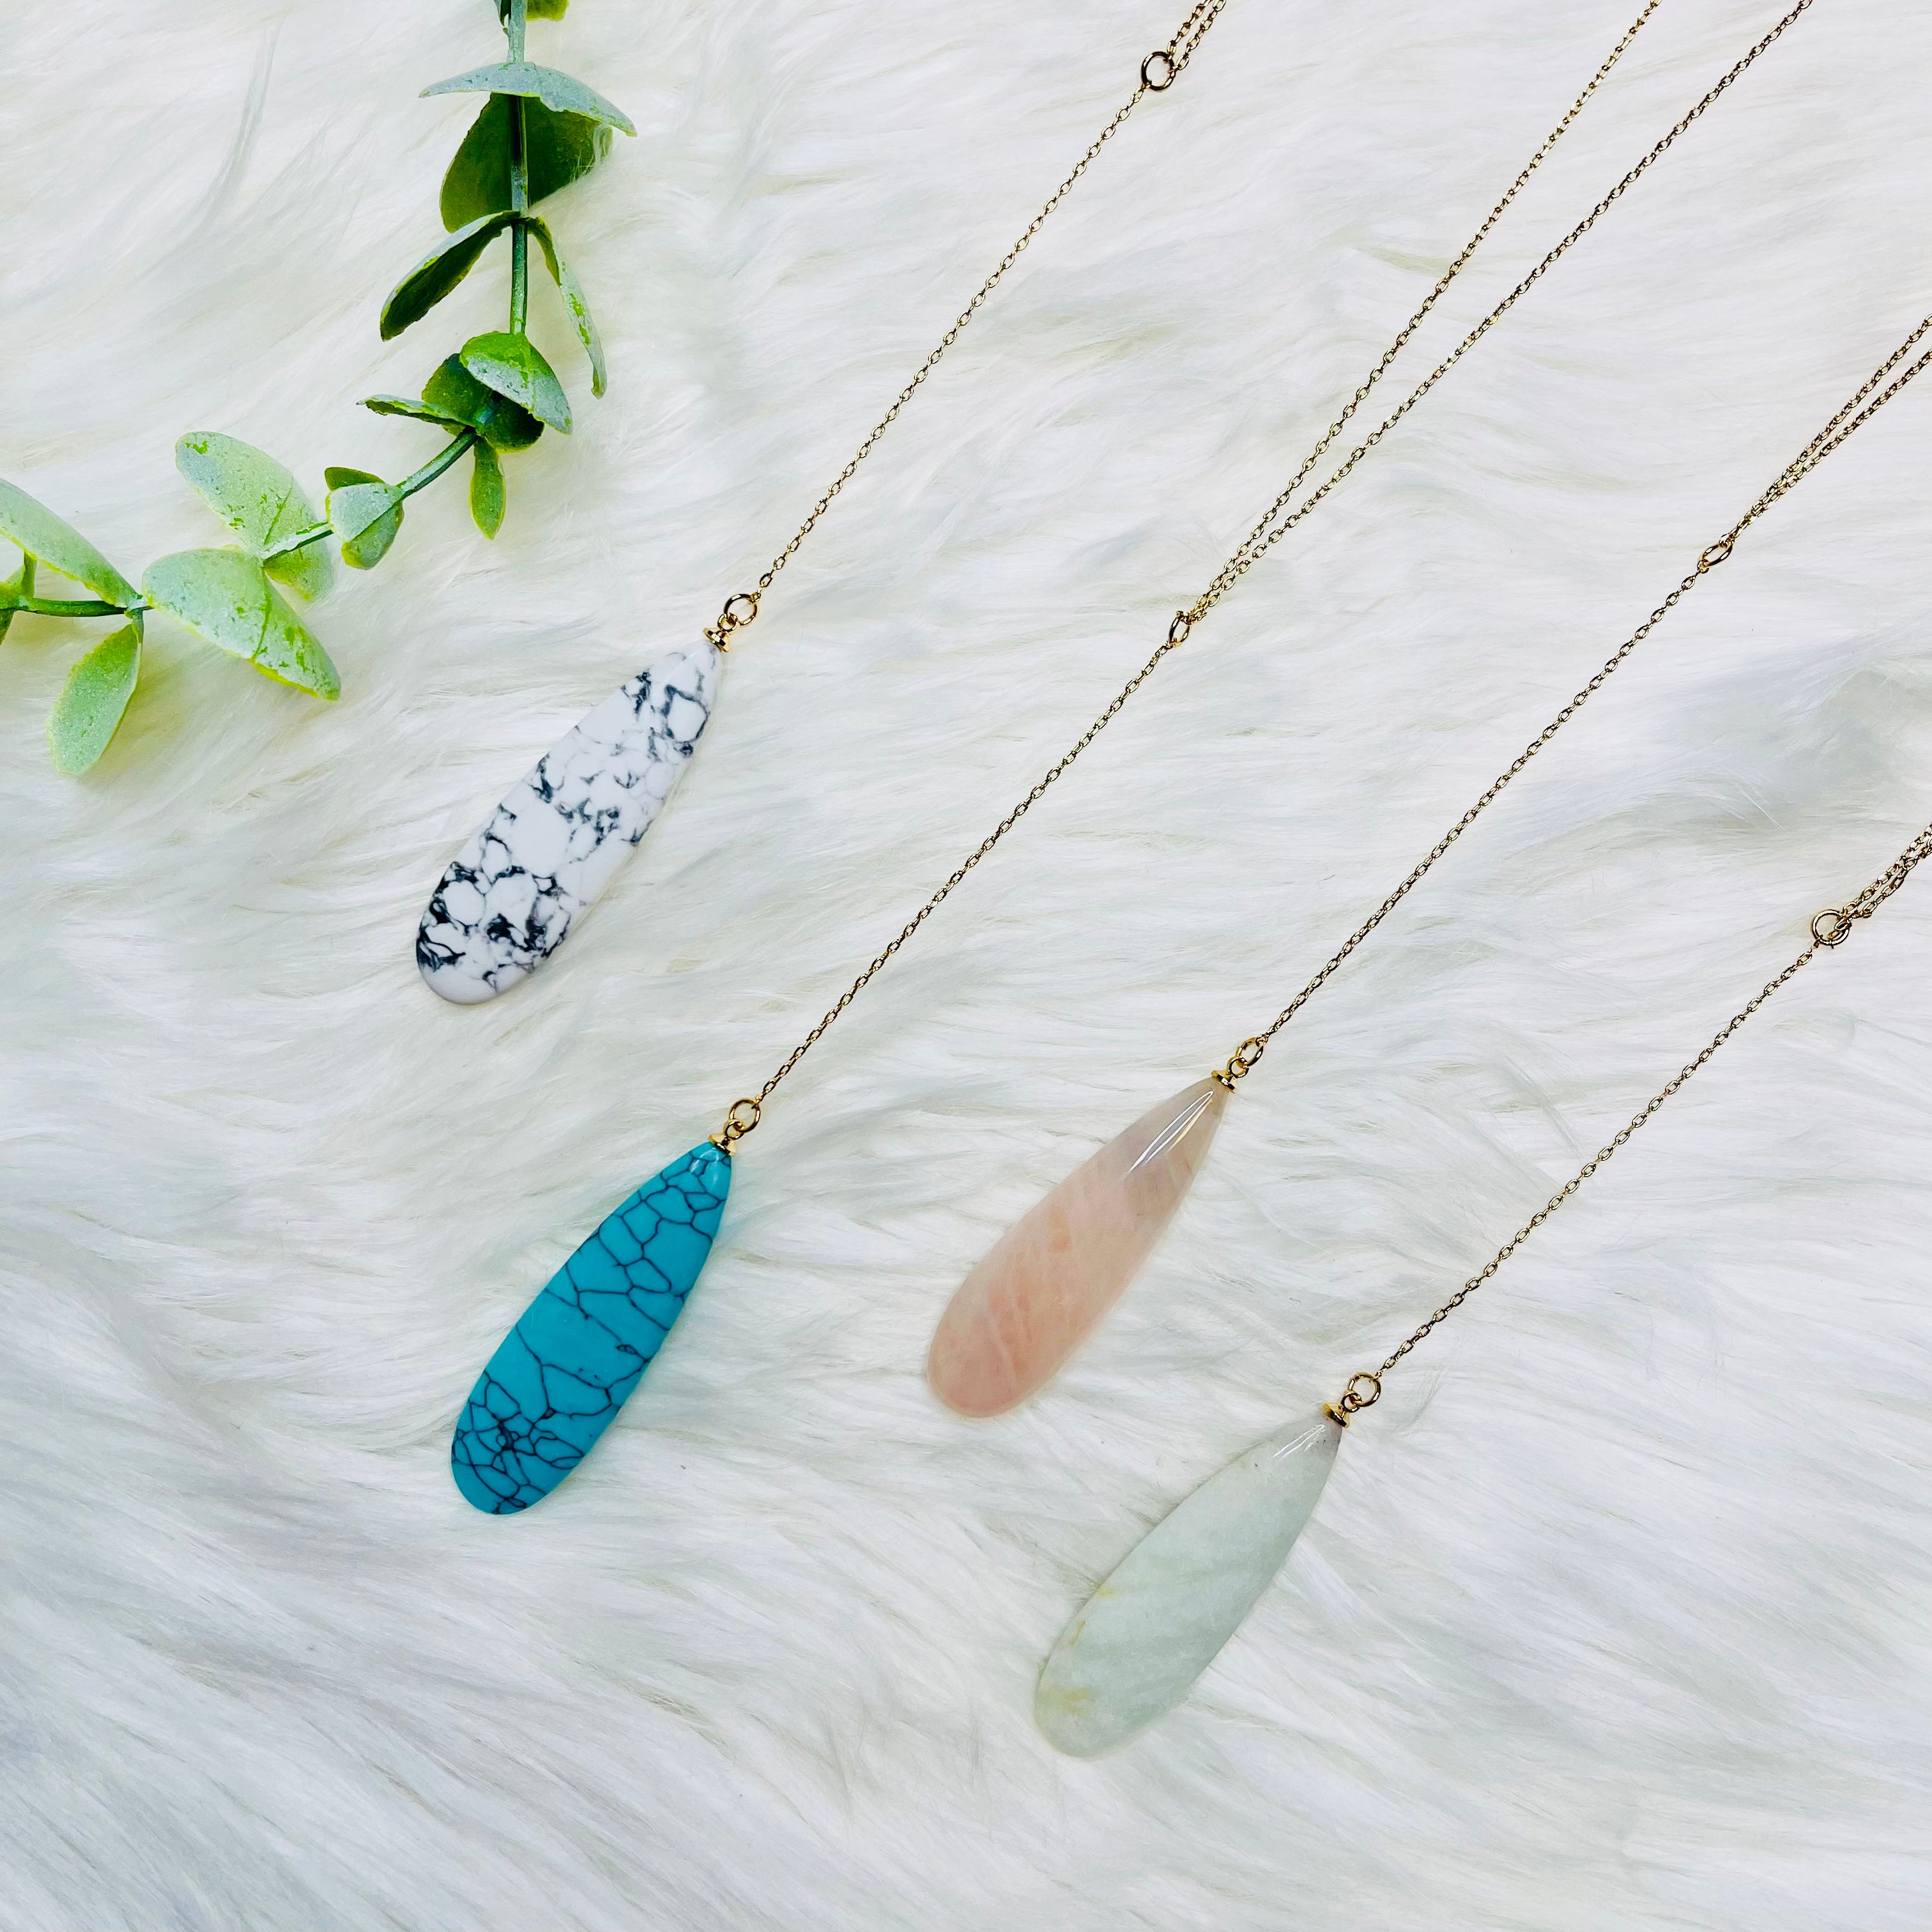 LONG OVAL NATURAL STONE PENDANT Y SHAPE NECKLACE